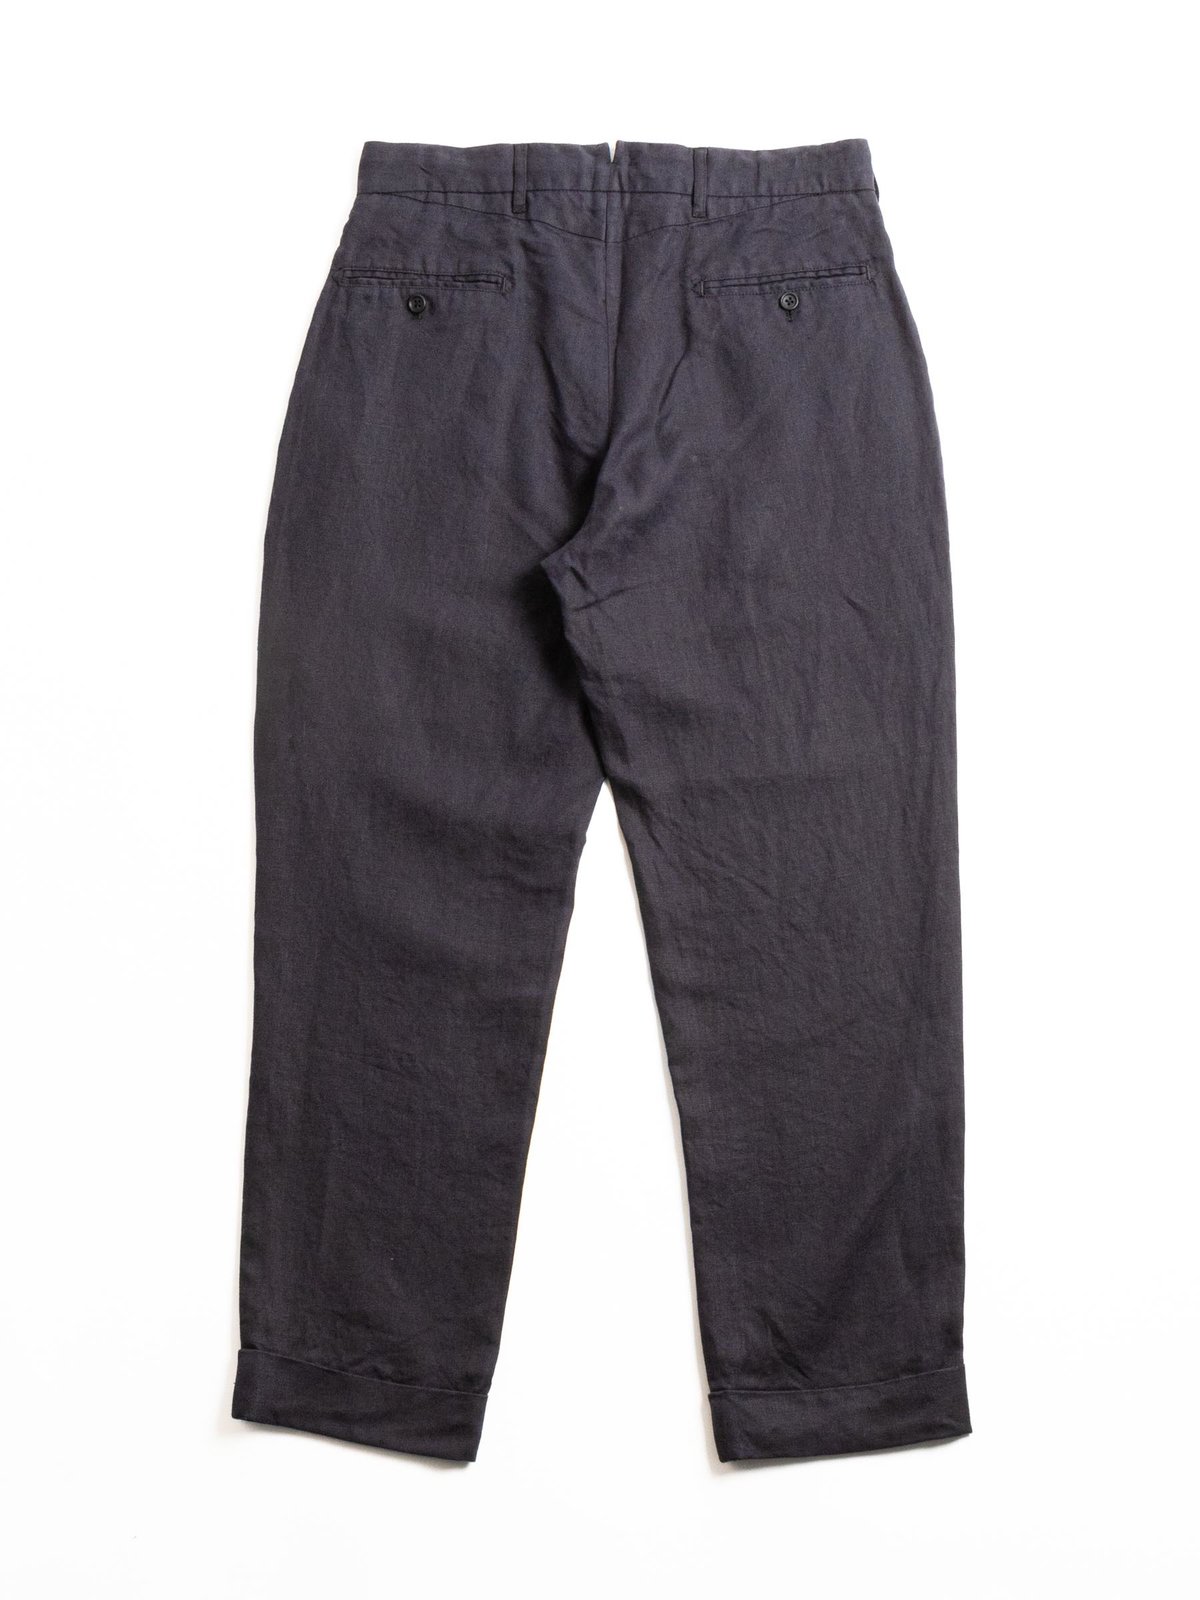 ANDOVER PANT NAVY LINEN TWILL - Image 6